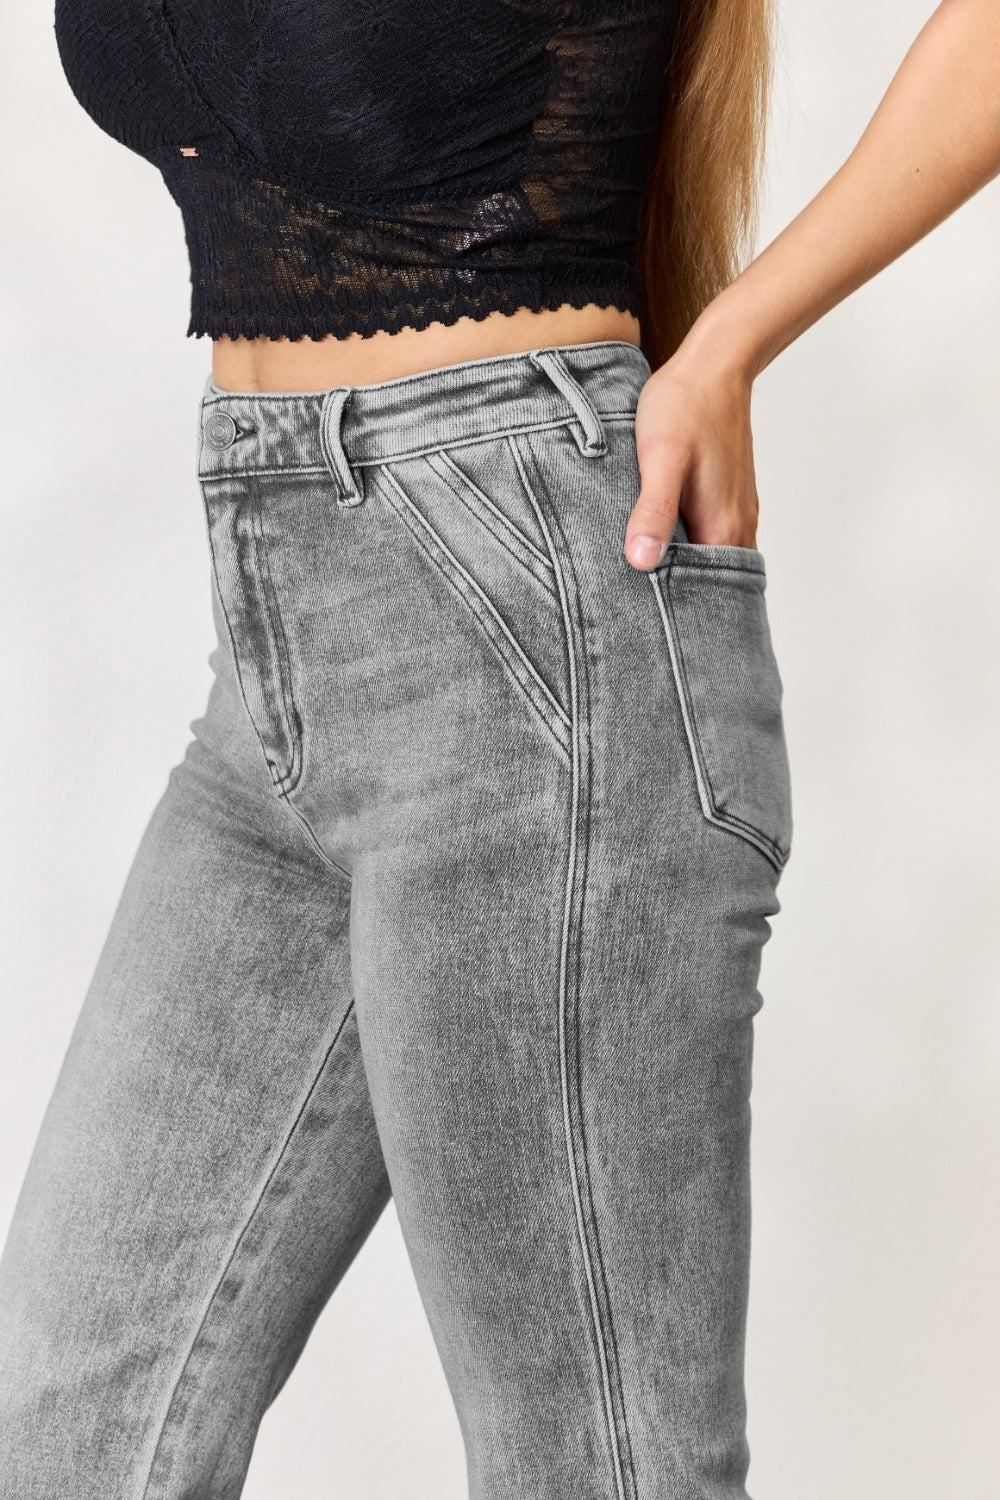 Kancan High Rise Slim Flare Jeans - Inspired Eye Boutique